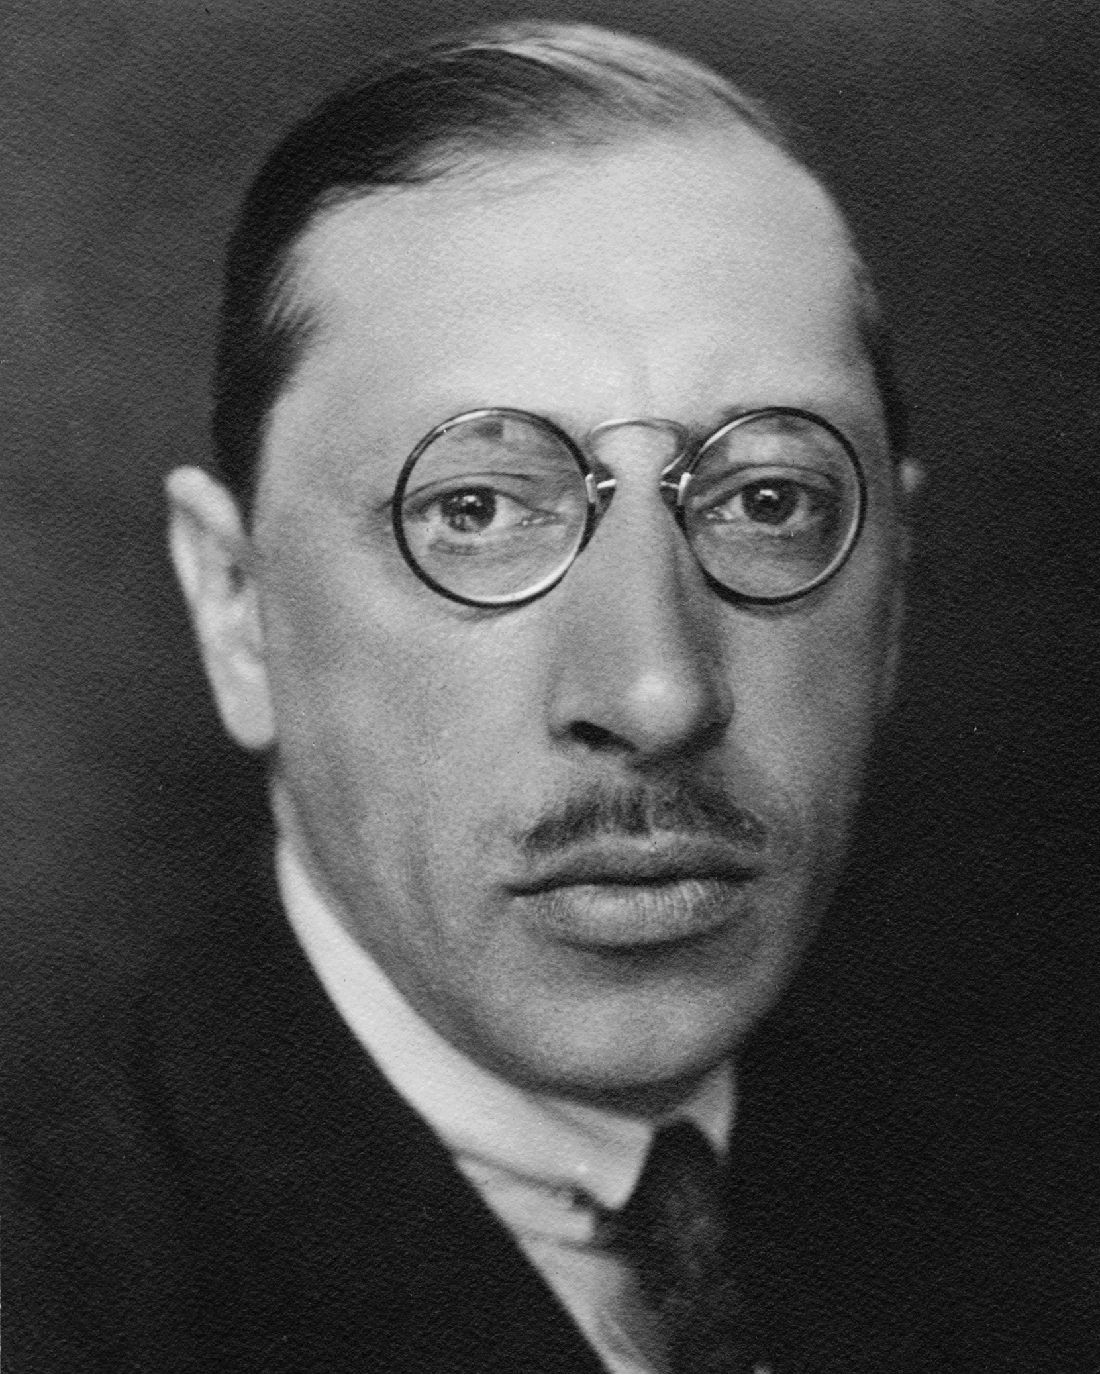 An image of Igor Stravinsky, a man with a melancholic expression and round glasses.